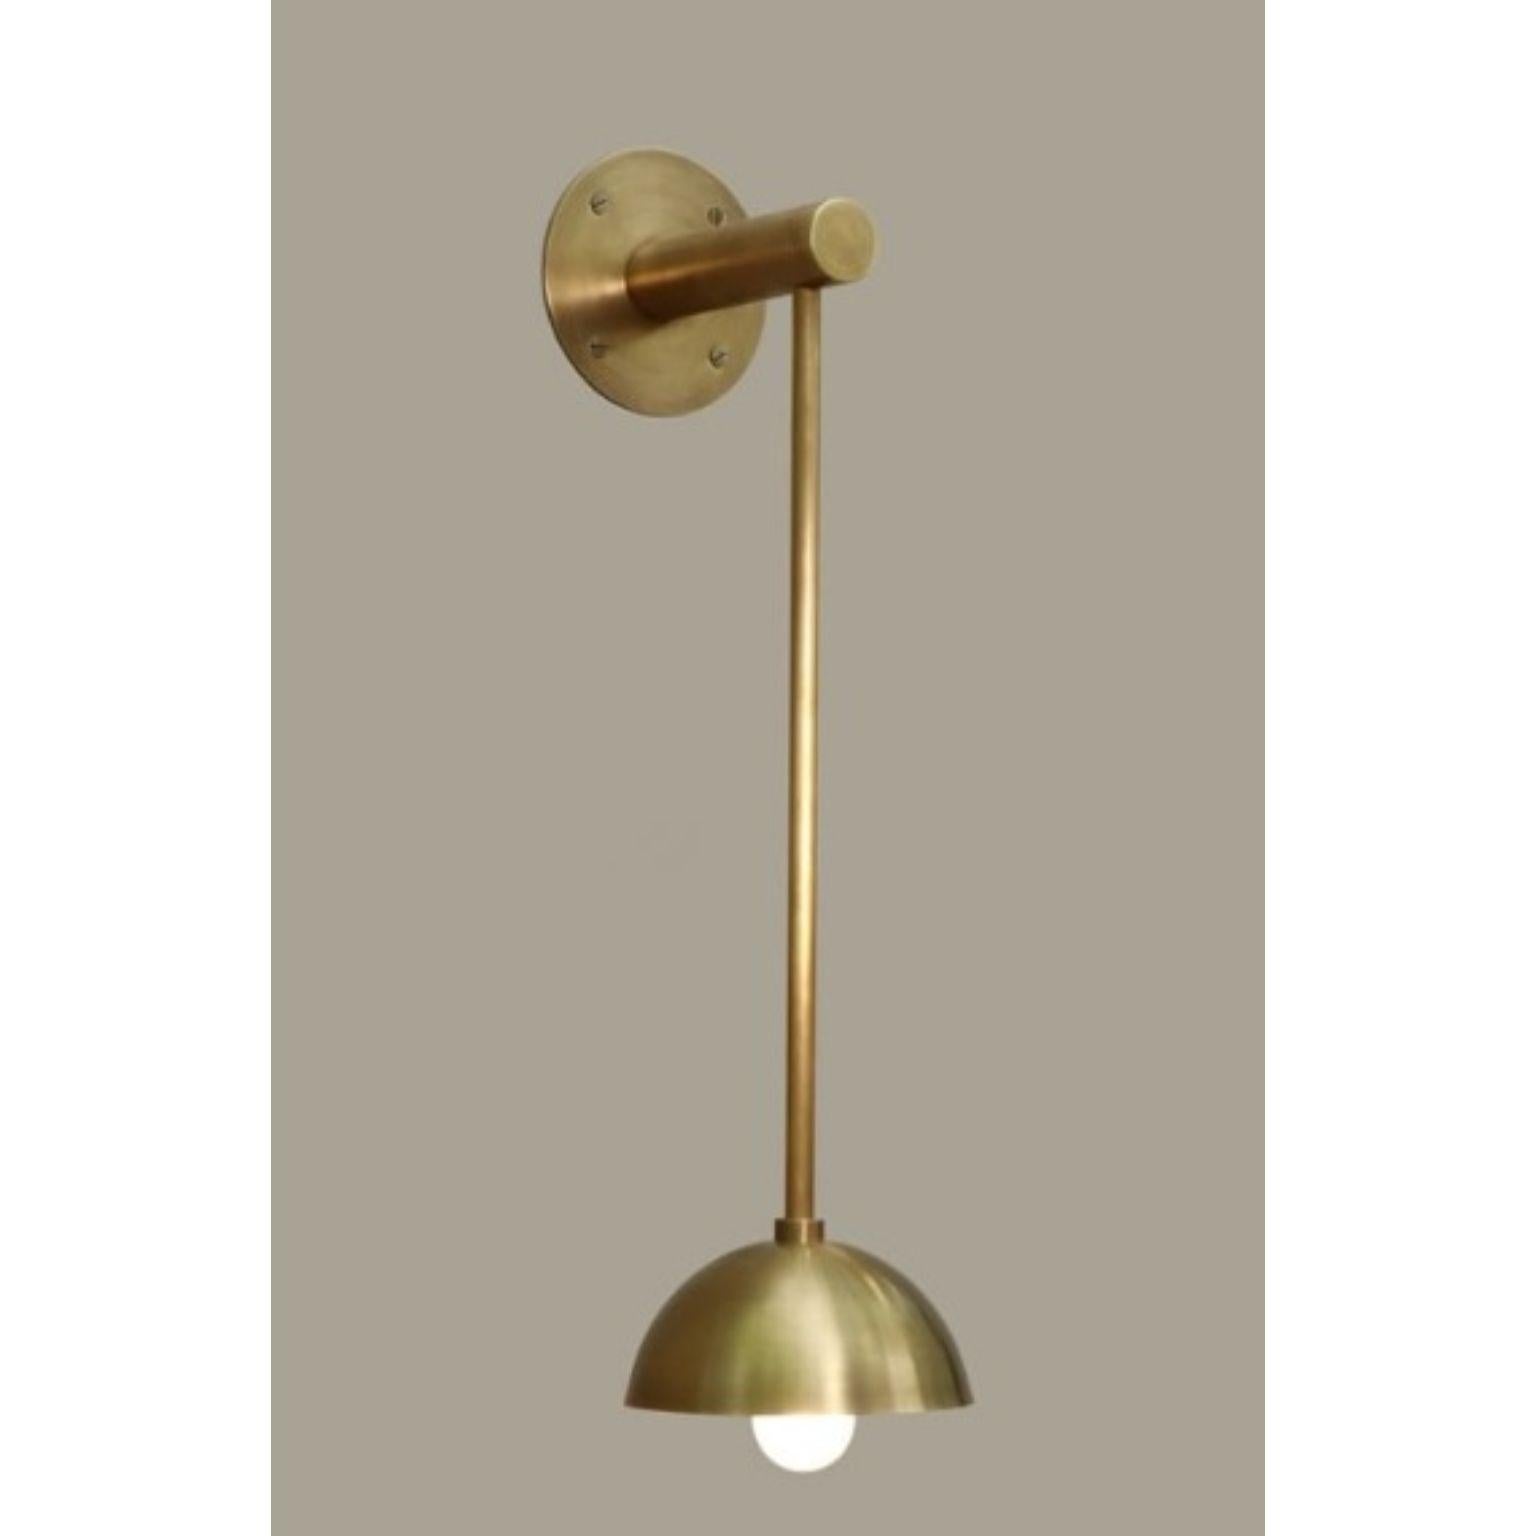 Dot Long Brass Dome Wall Sconce by Lamp Shaper
Dimensions: D 15 x W 19 x H 53.5 cm.
Materials: Brass.

Different finishes available: raw brass, aged brass, burnt brass and brushed brass Please contact us.

All our lamps can be wired according to